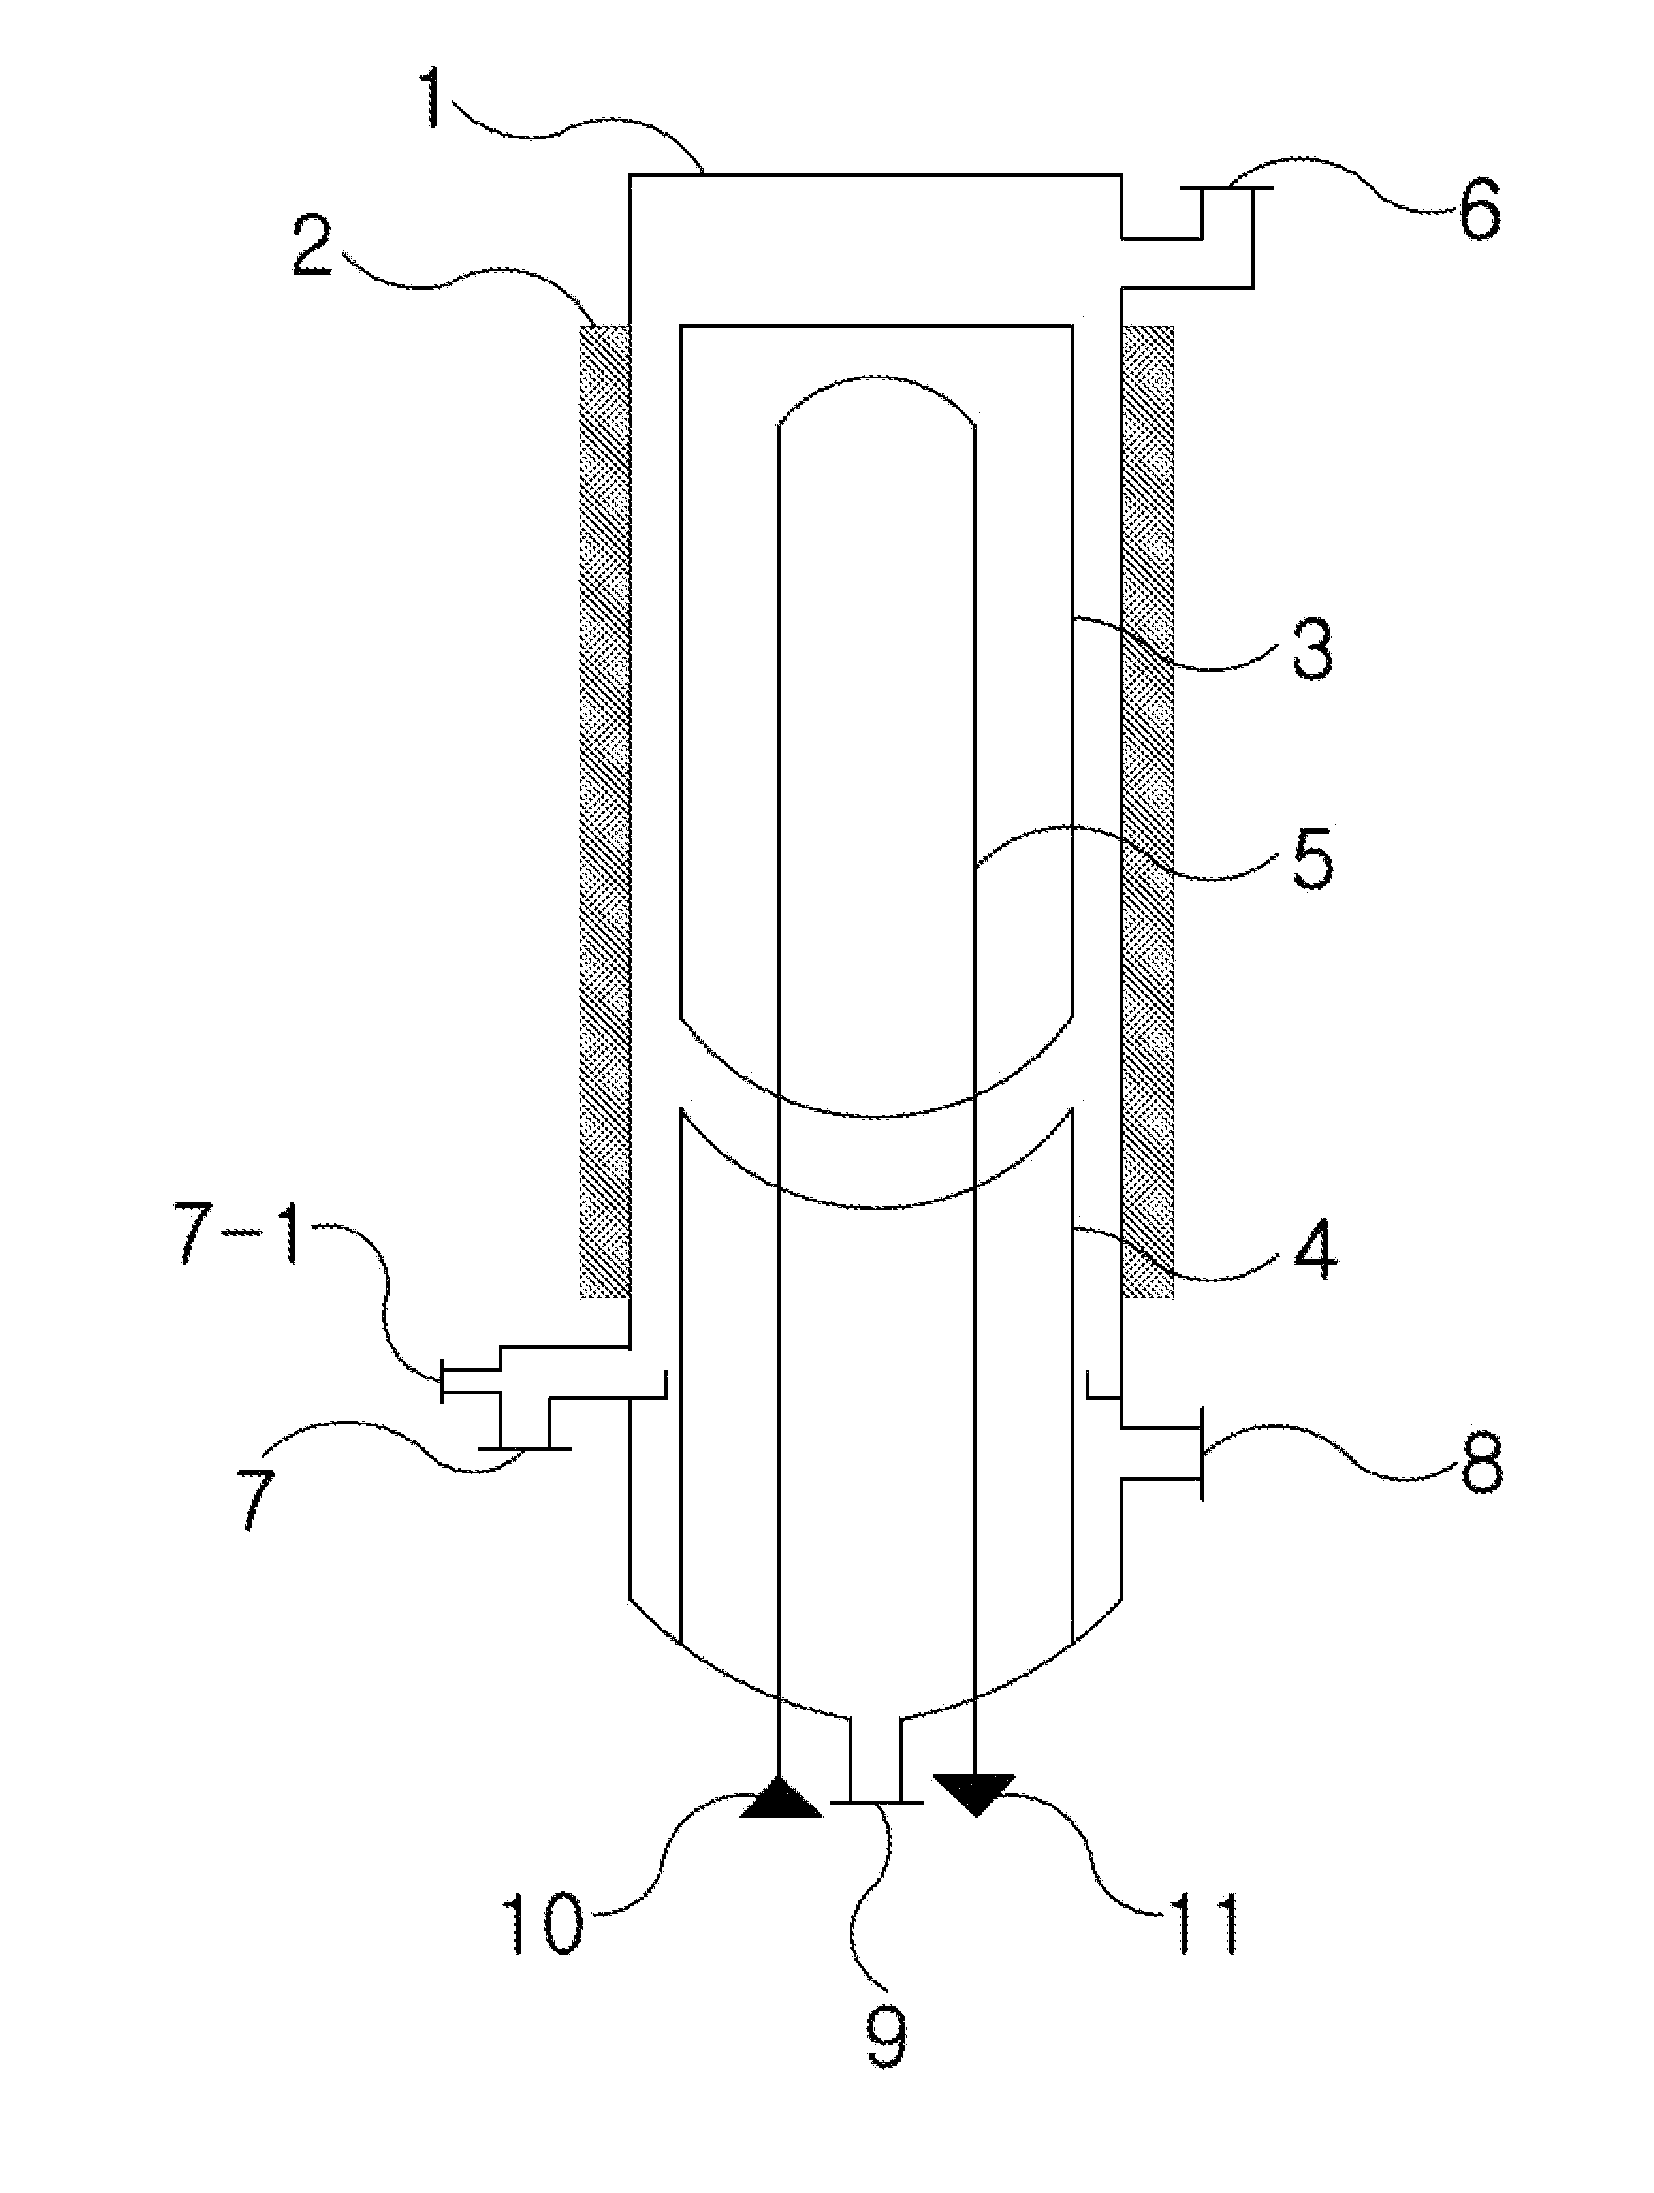 Method for preparing high-purity anhydrosugar alcohol having improved yield by using waste from crystallization step